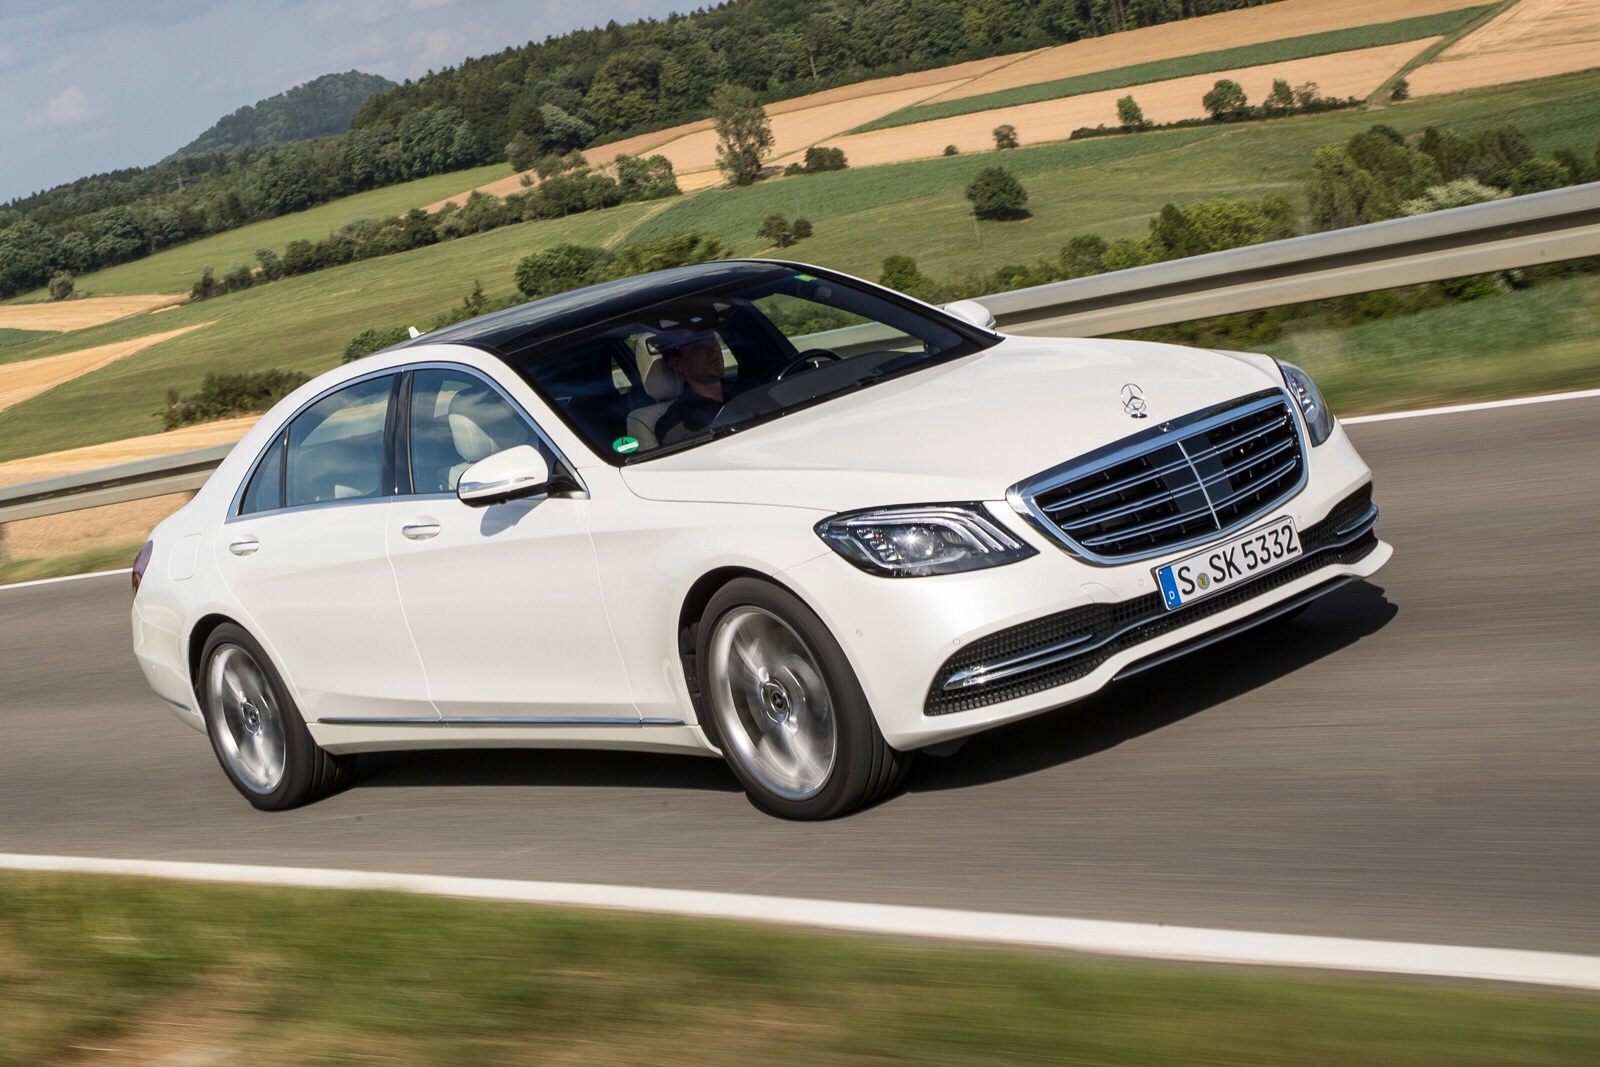 Mercedes to bring electric equivalent of its S-Class luxury sedan